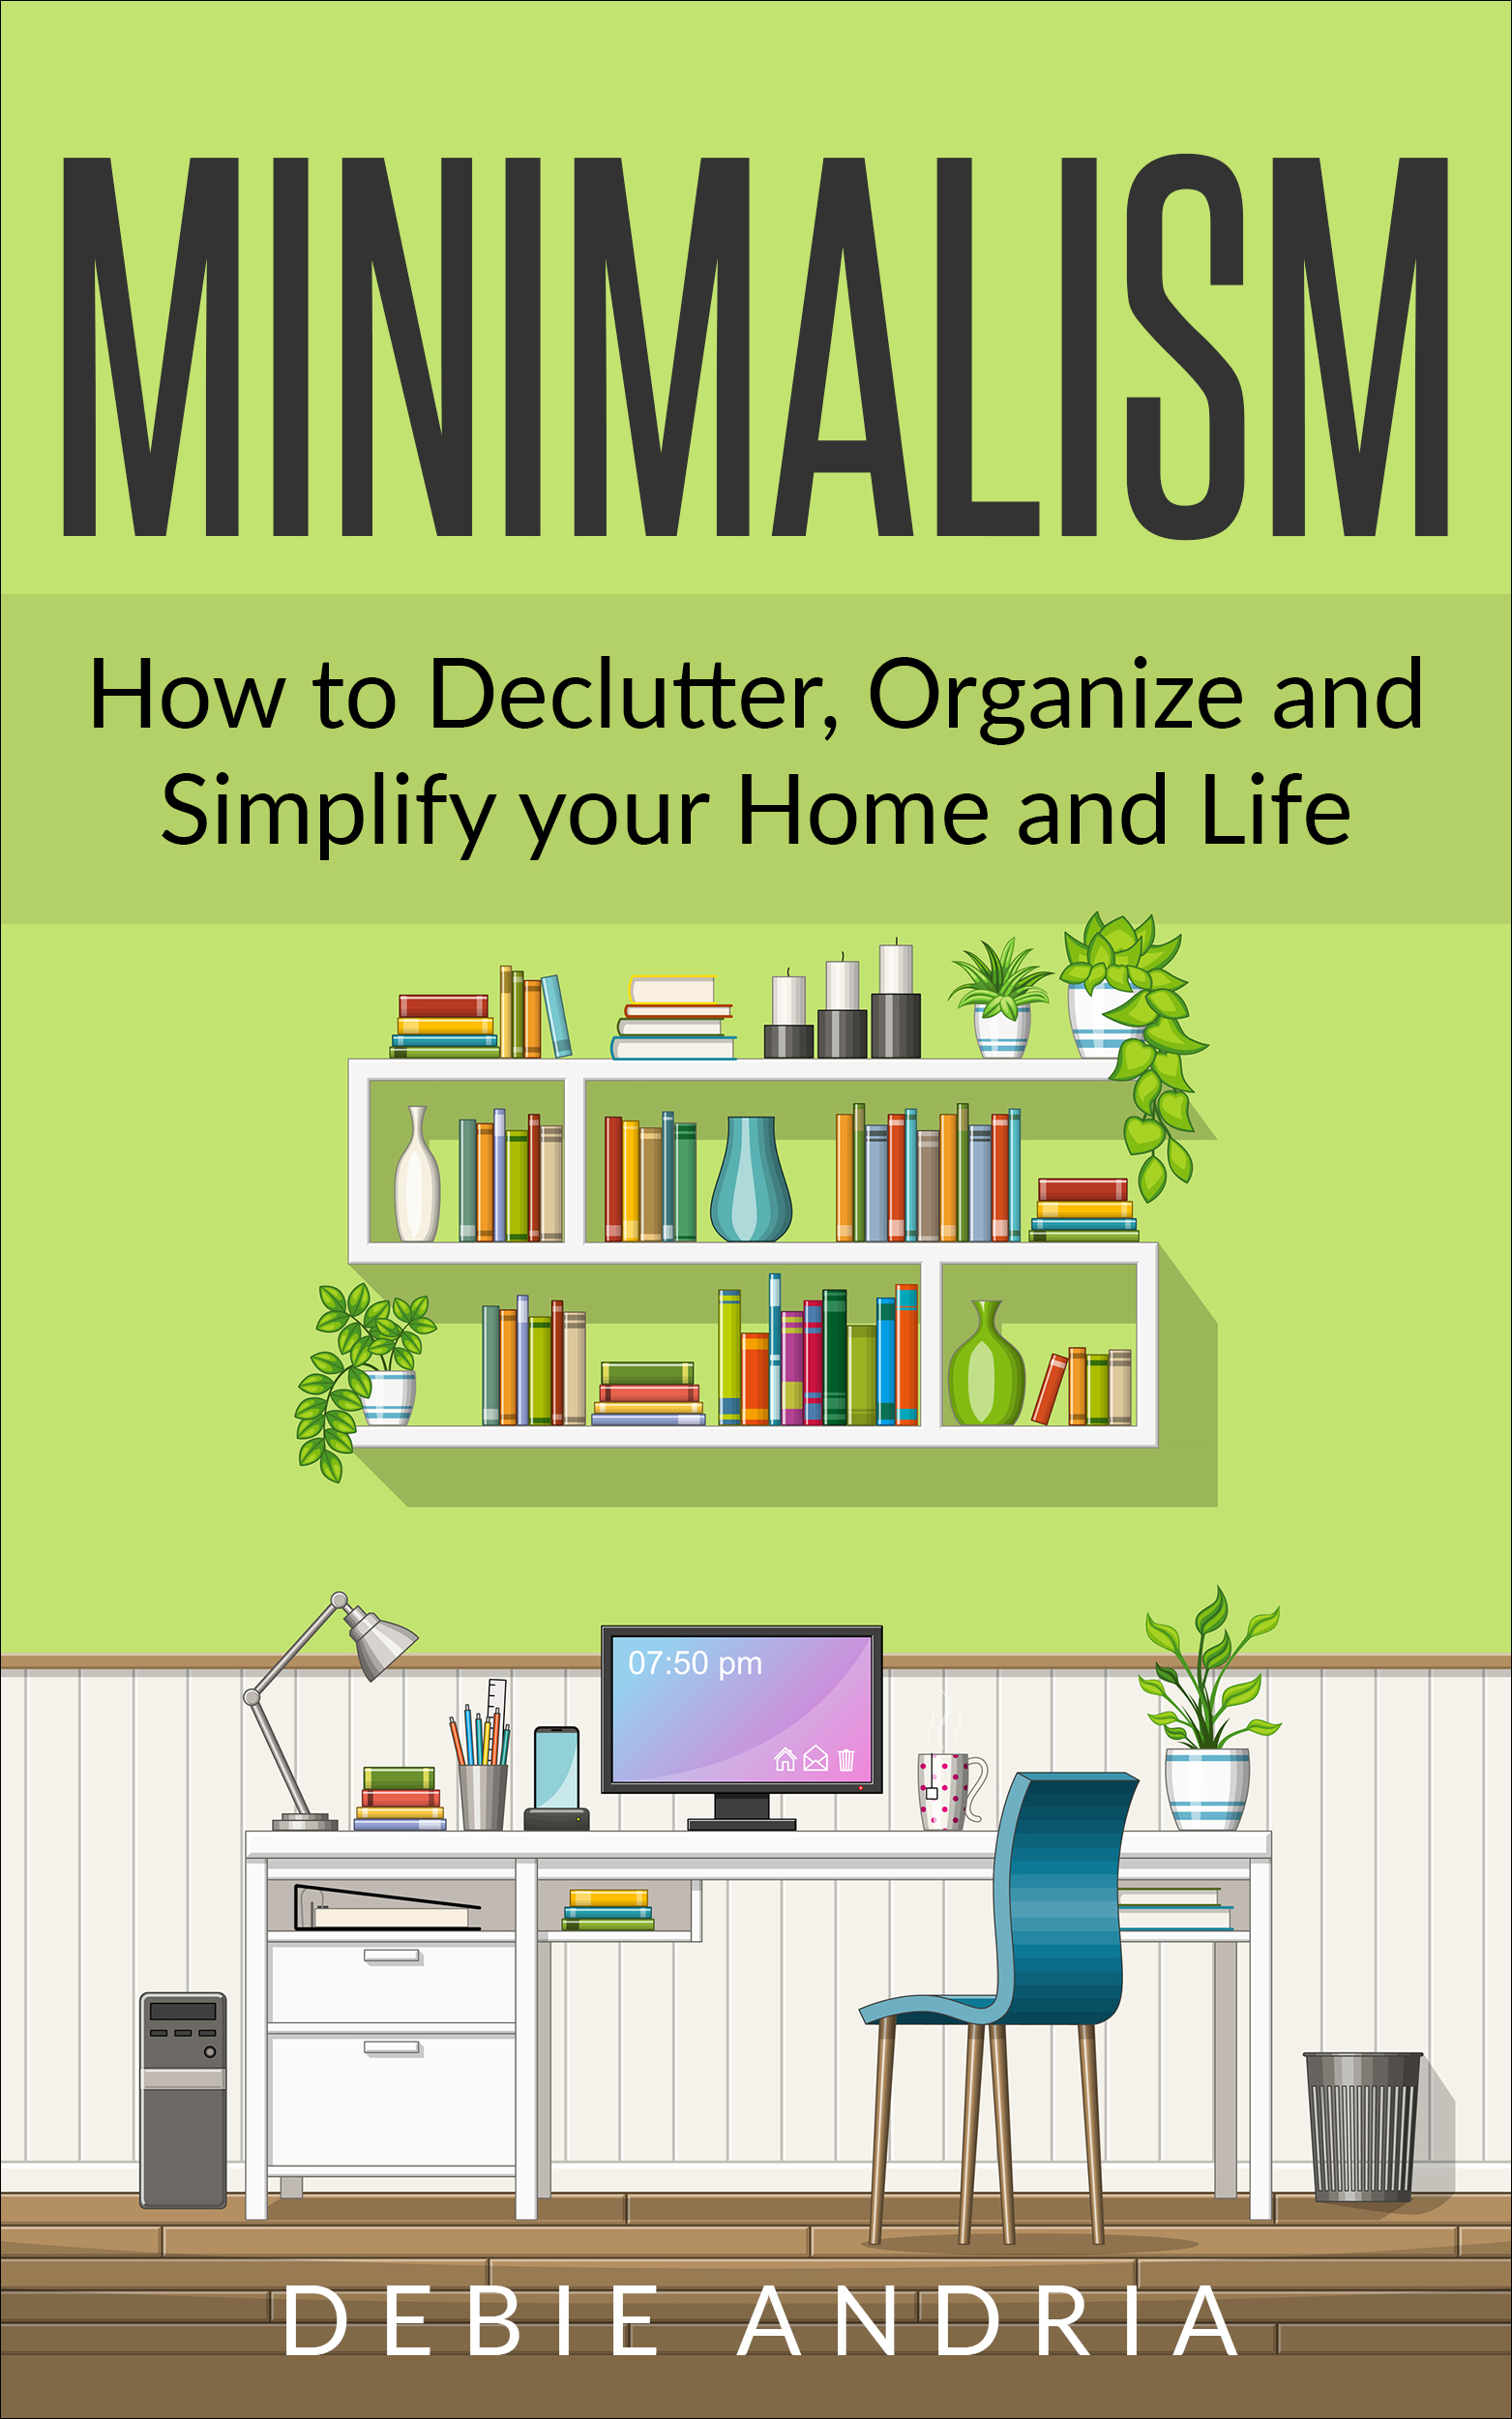 FREE: Minimalism: How to Declutter, Organize and Simplify your Home and Life by Debie Andria